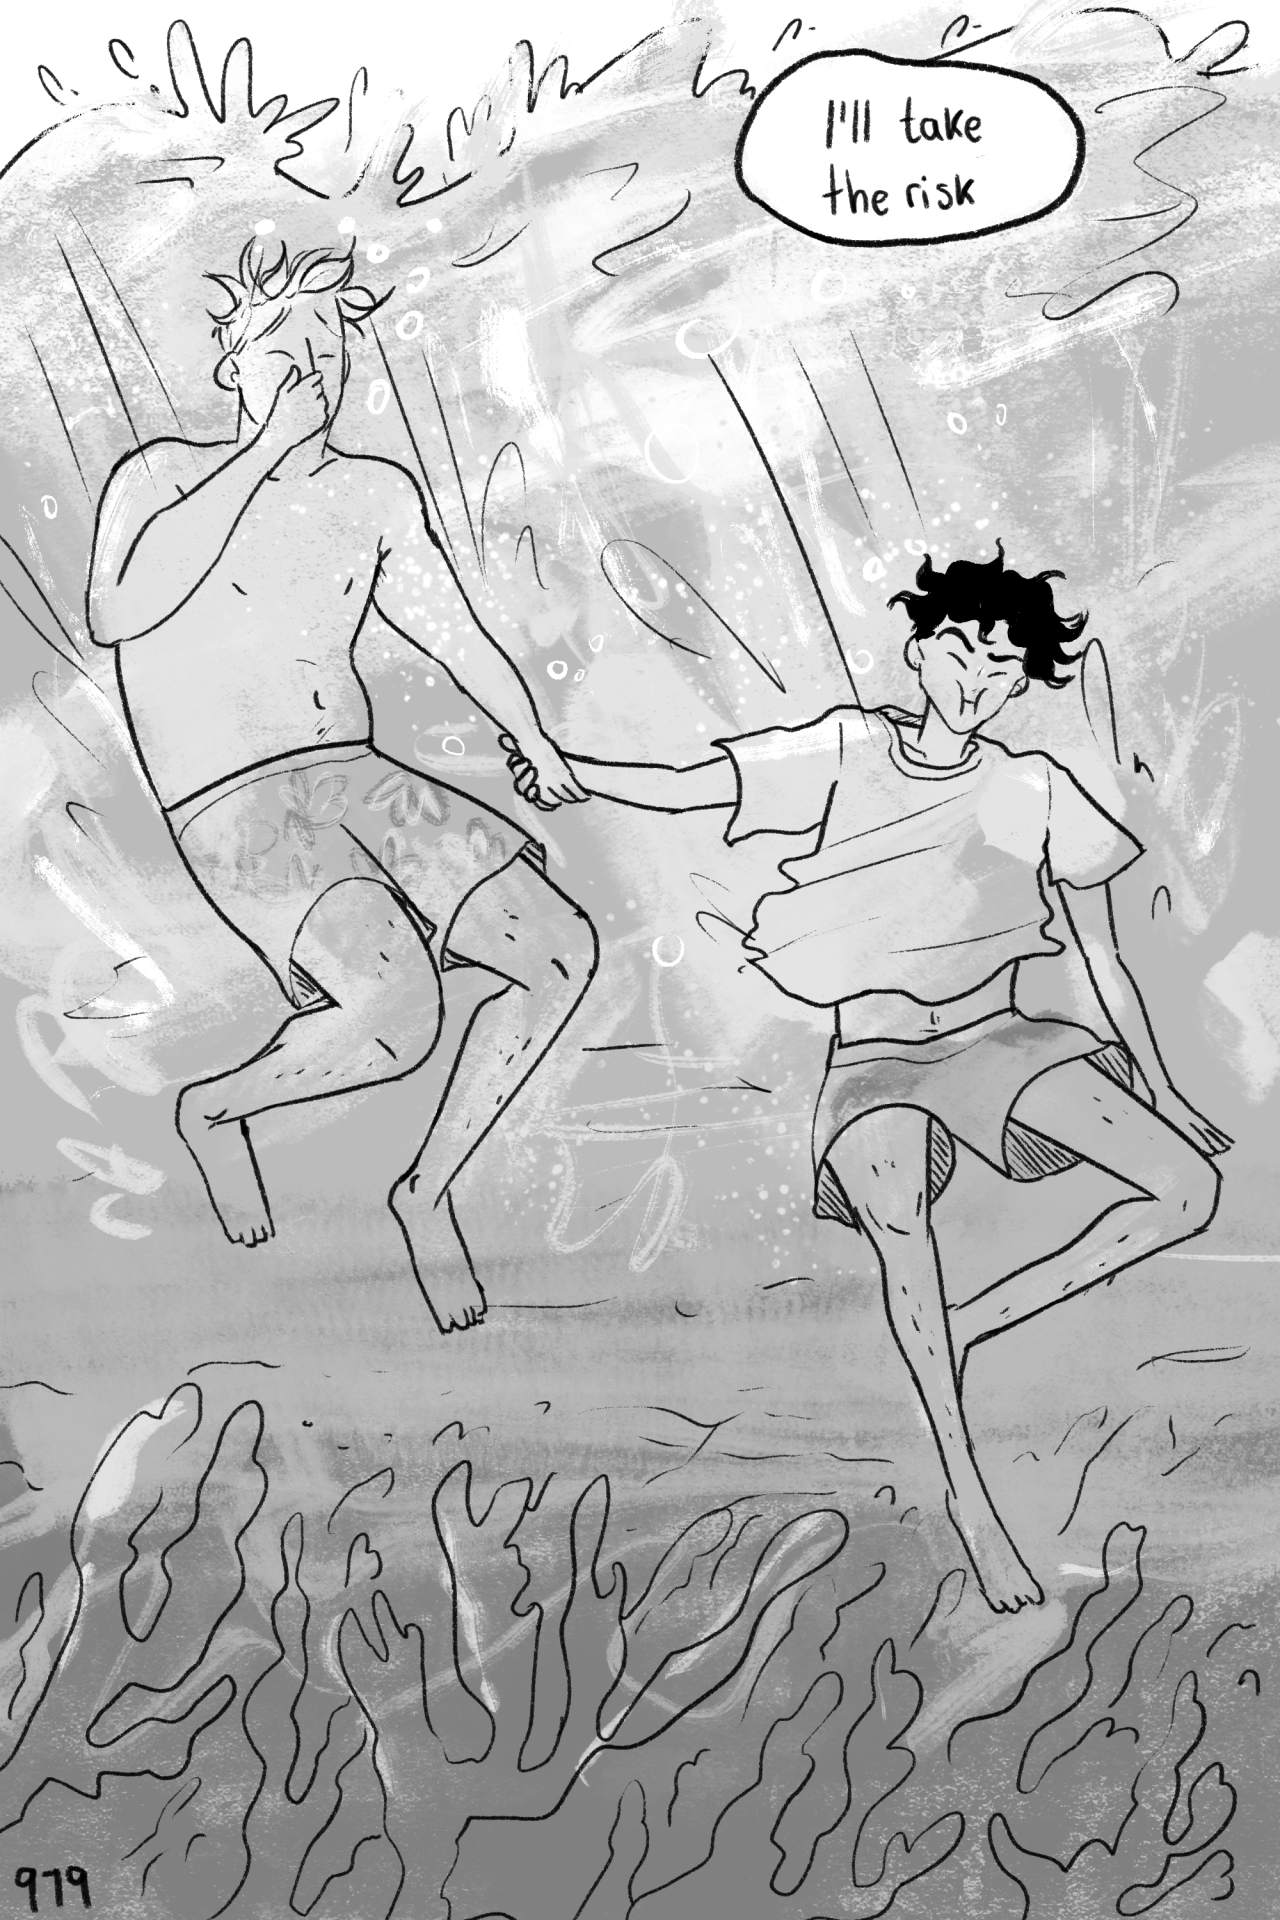 HEARTSTOPPER - chapter 5 - 9 alone in the ocean read from the...